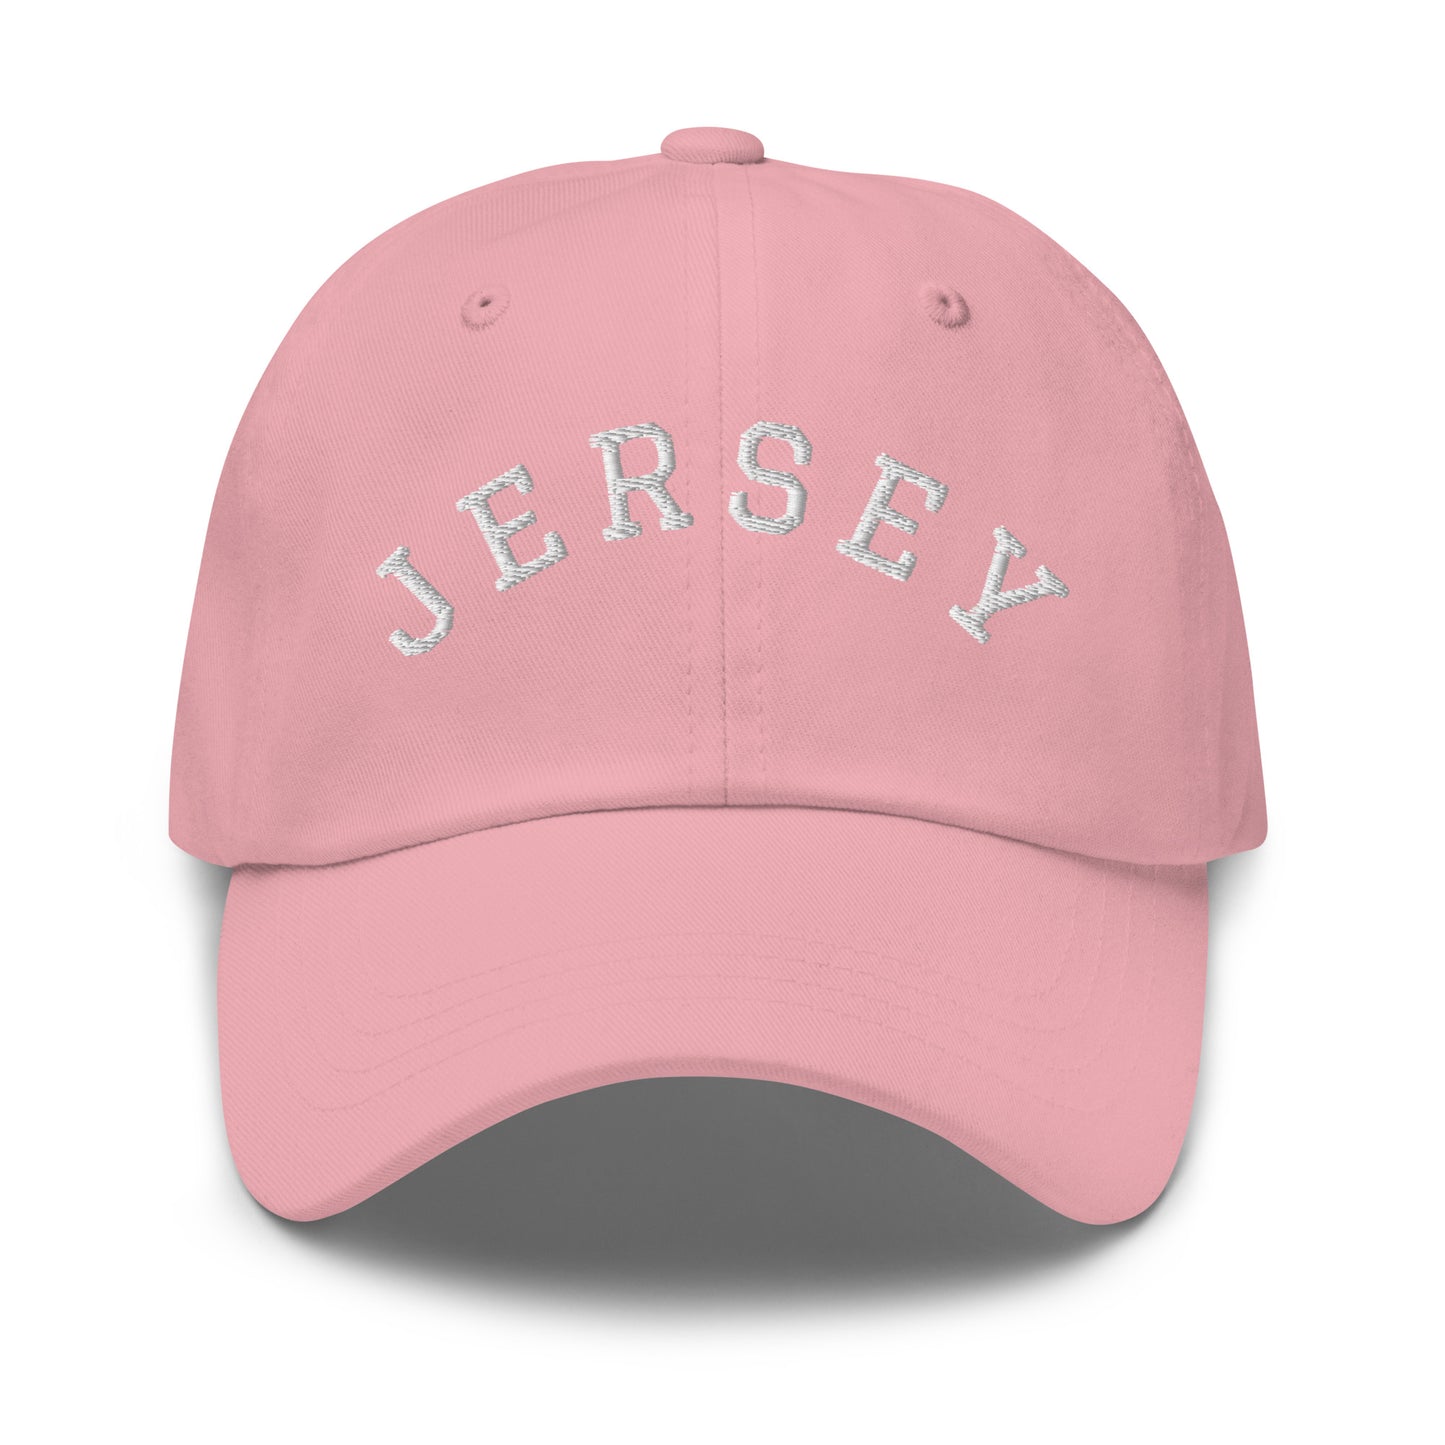 New Jersey "Jersey" Arch Dad Hat